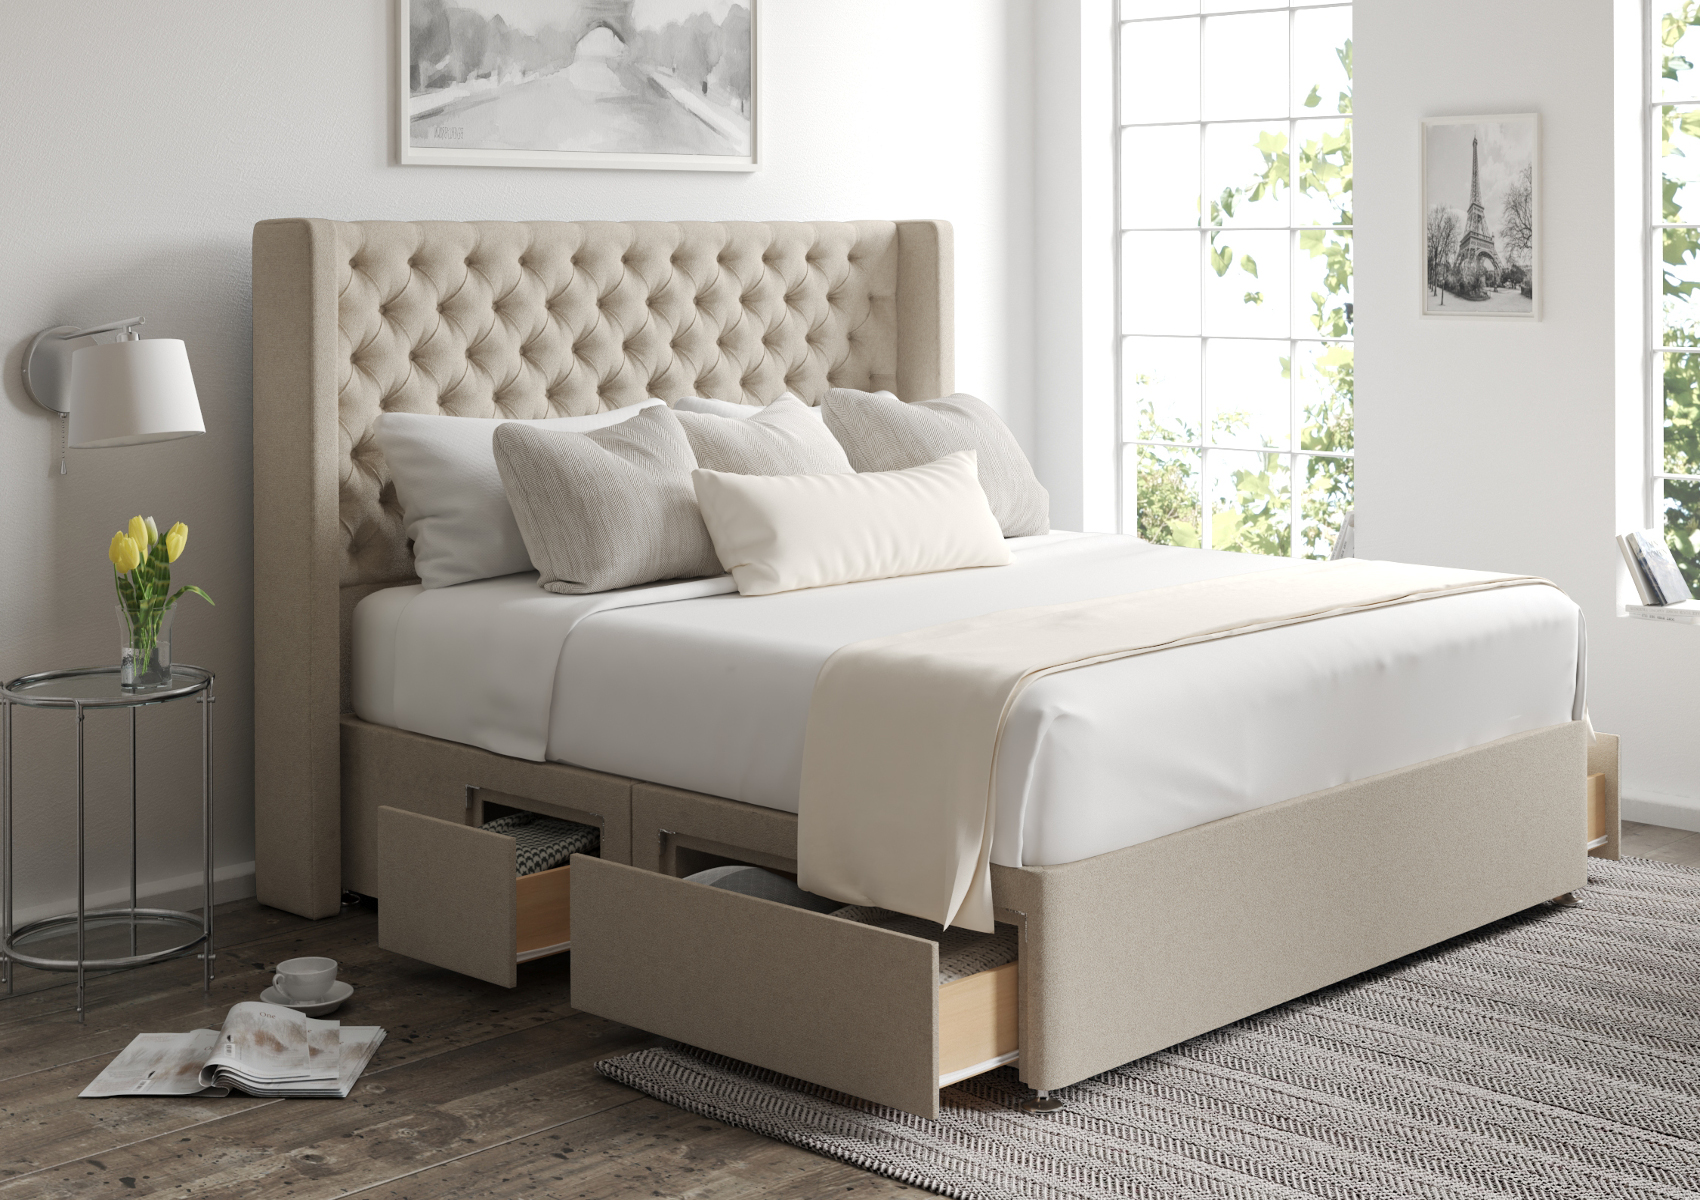 View Bella Trebla Stone Upholstered King Size Bed Time4Sleep information